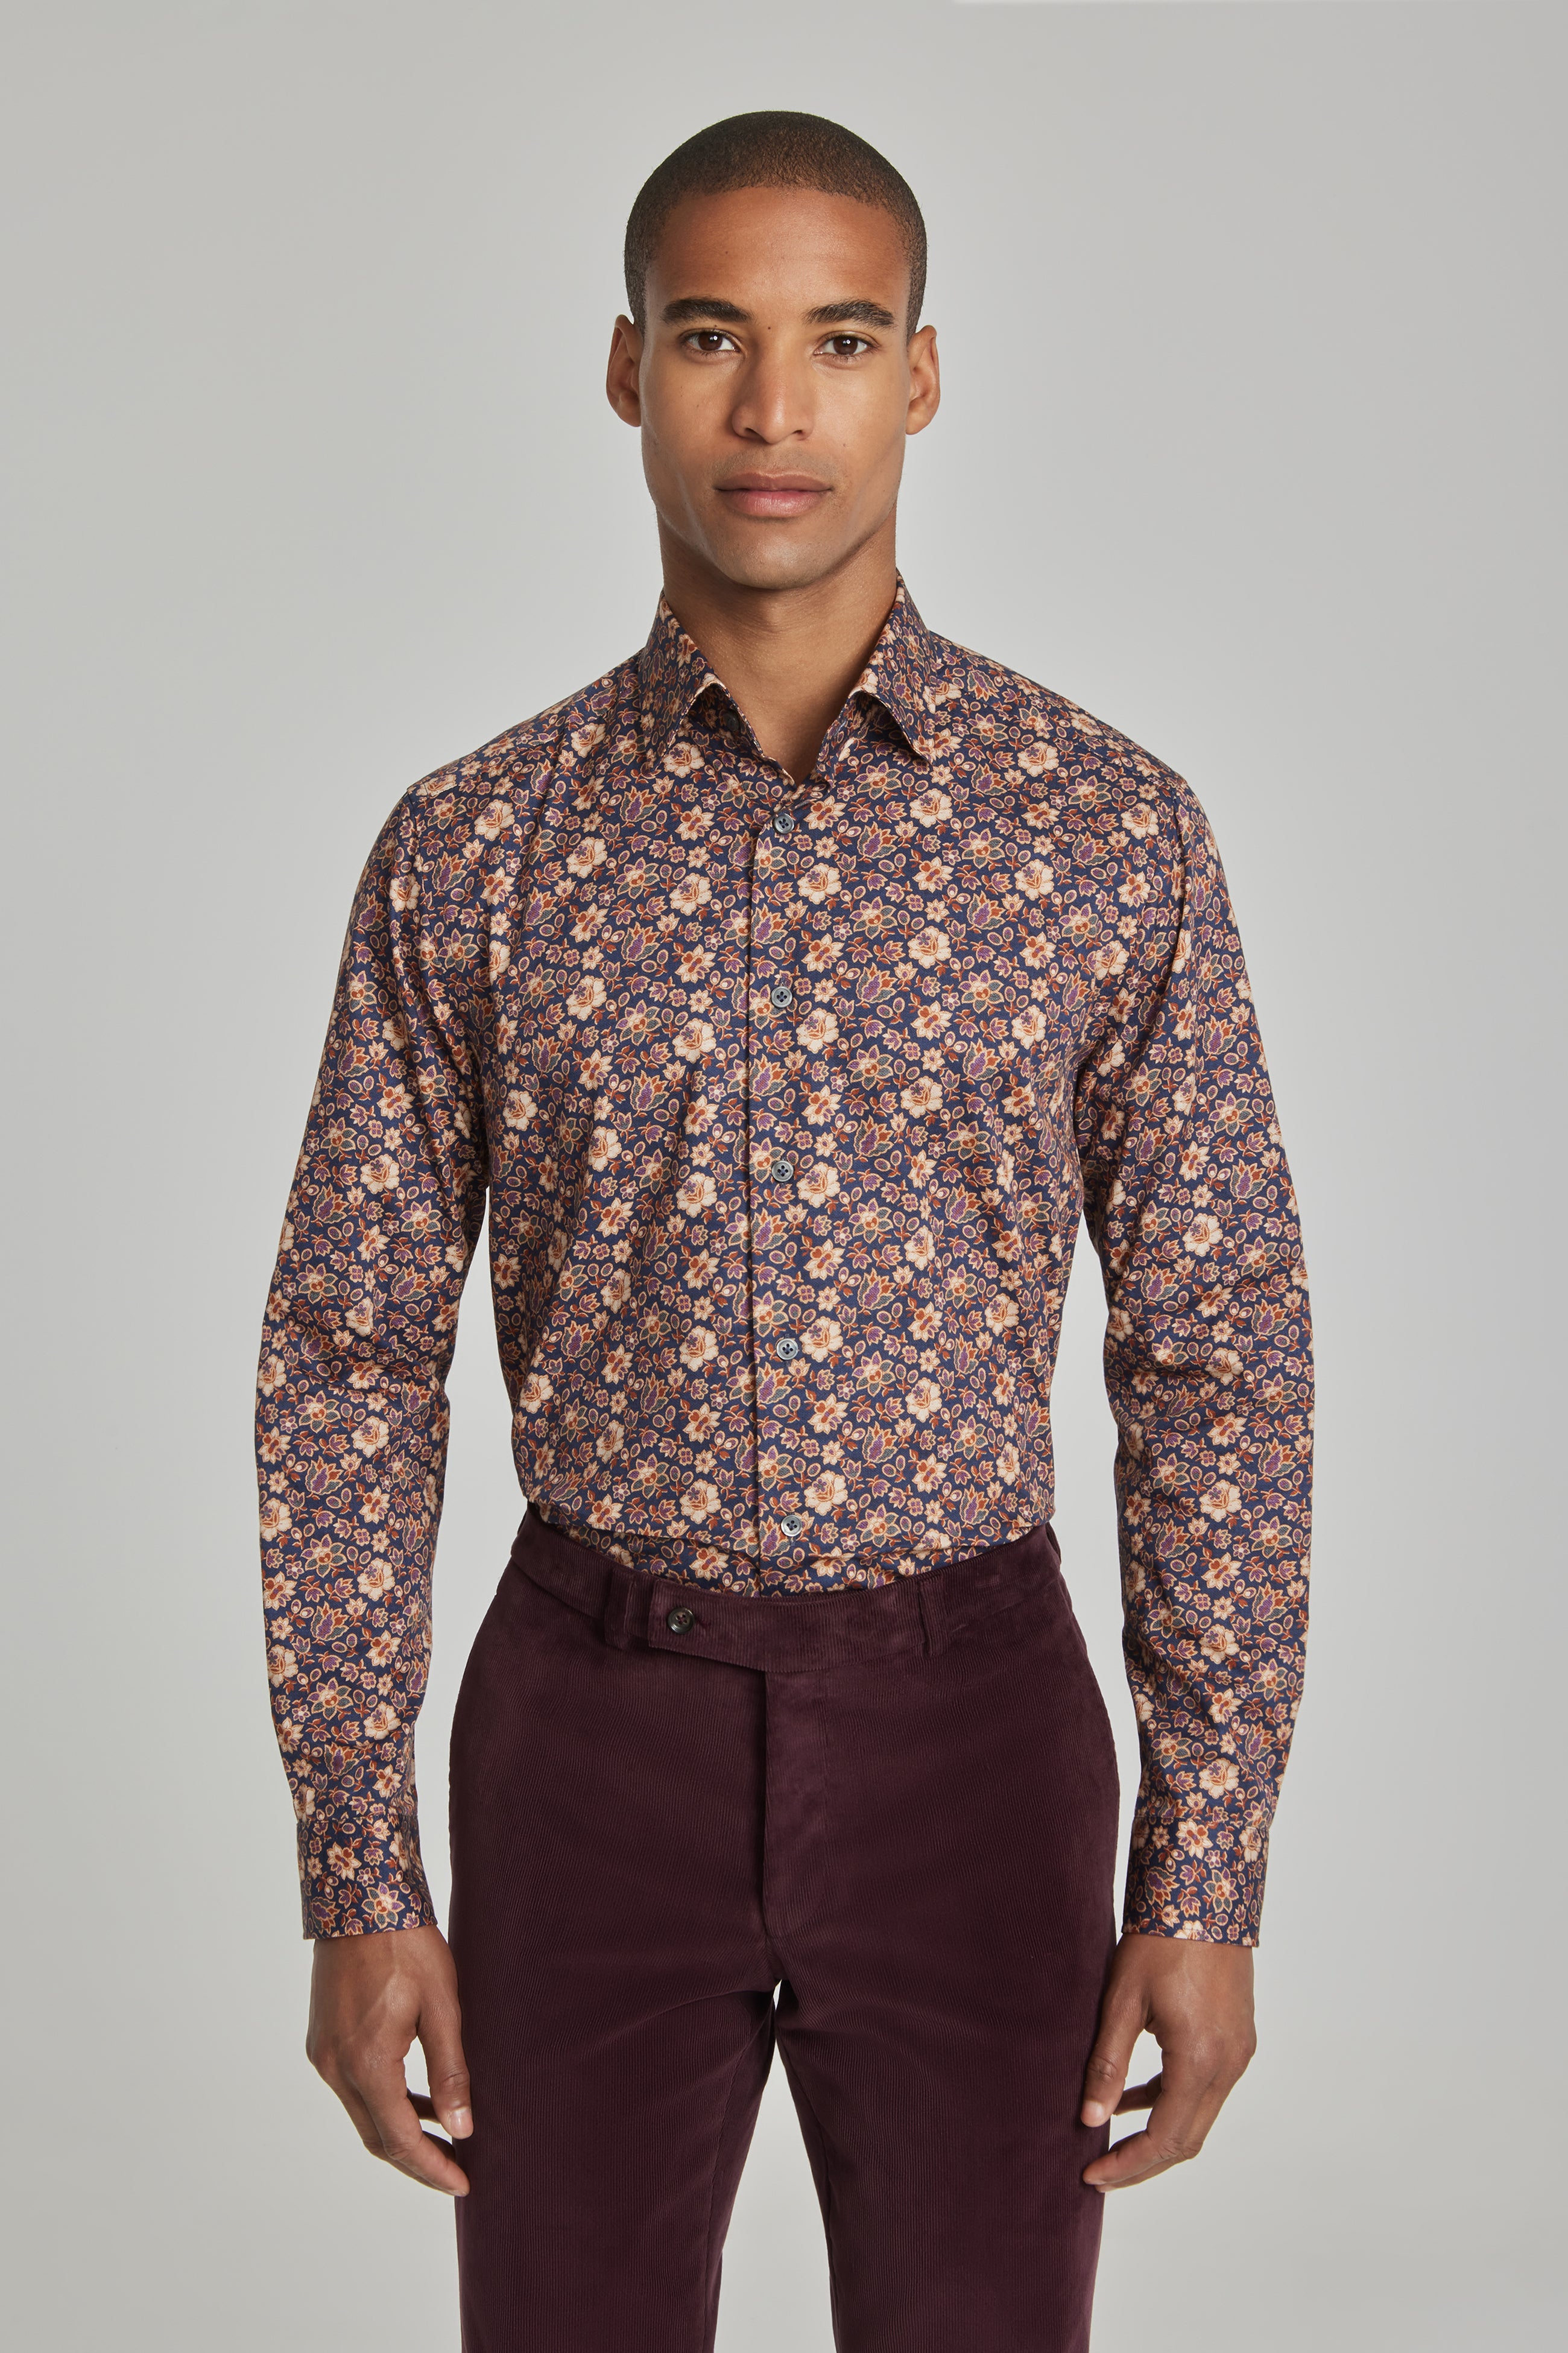 Alt view Floral Print Cotton Shirt in Navy and Burgundy